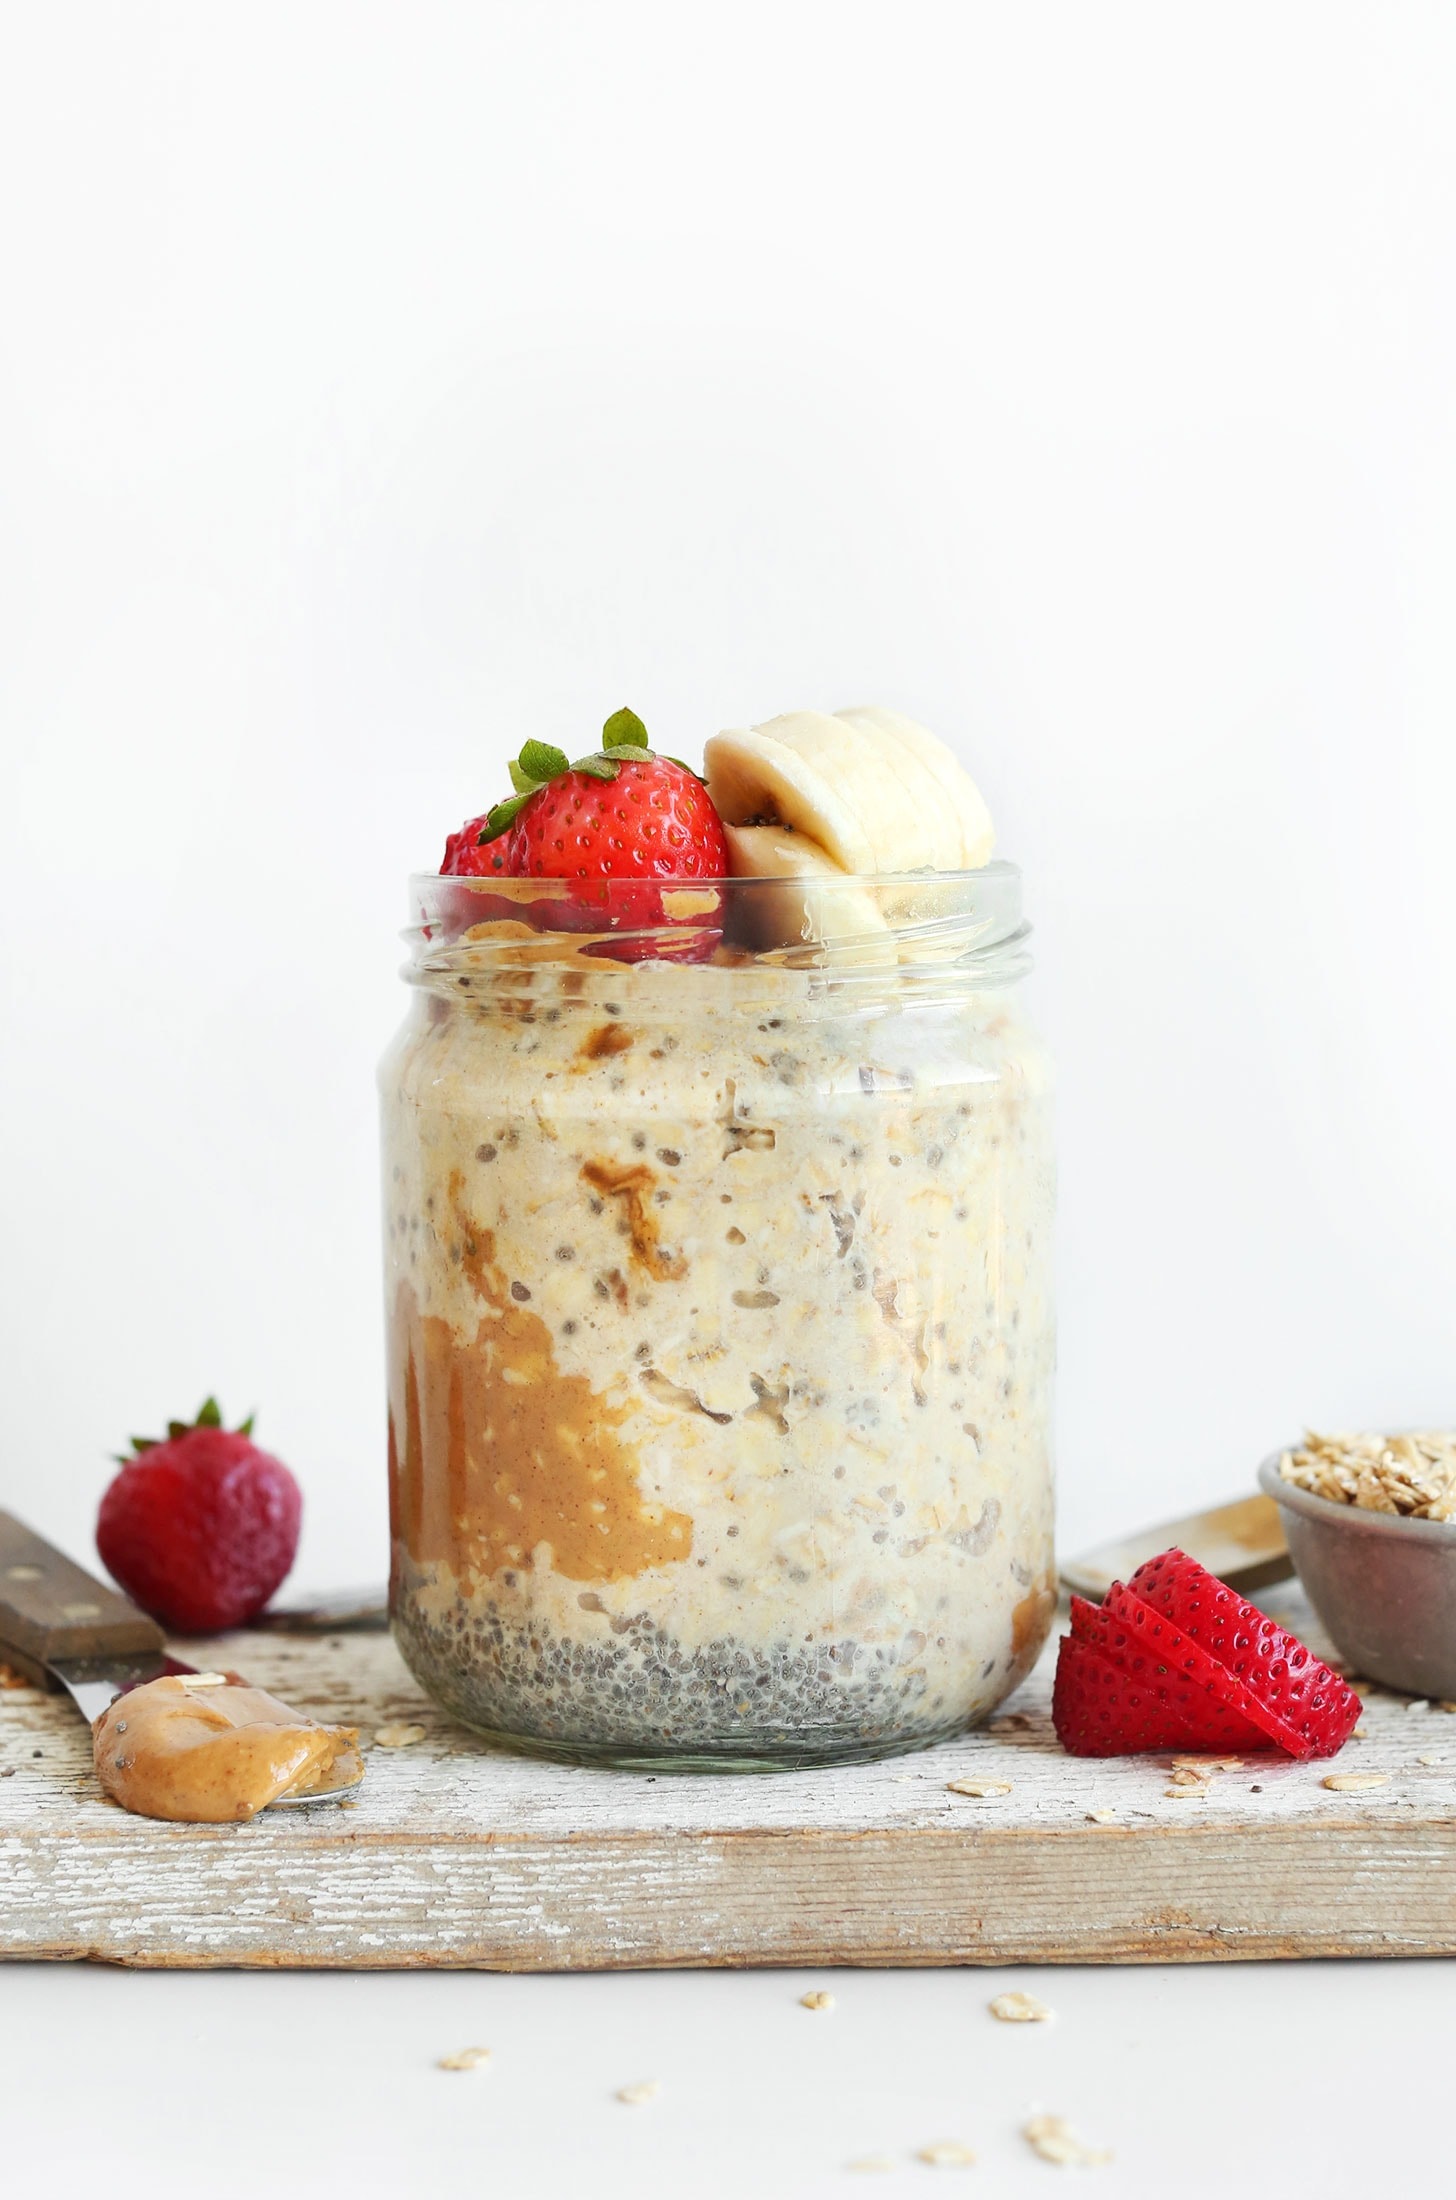 Overnight oats in a mason jar with chia seeds, peanut butter, banana and strawberry.